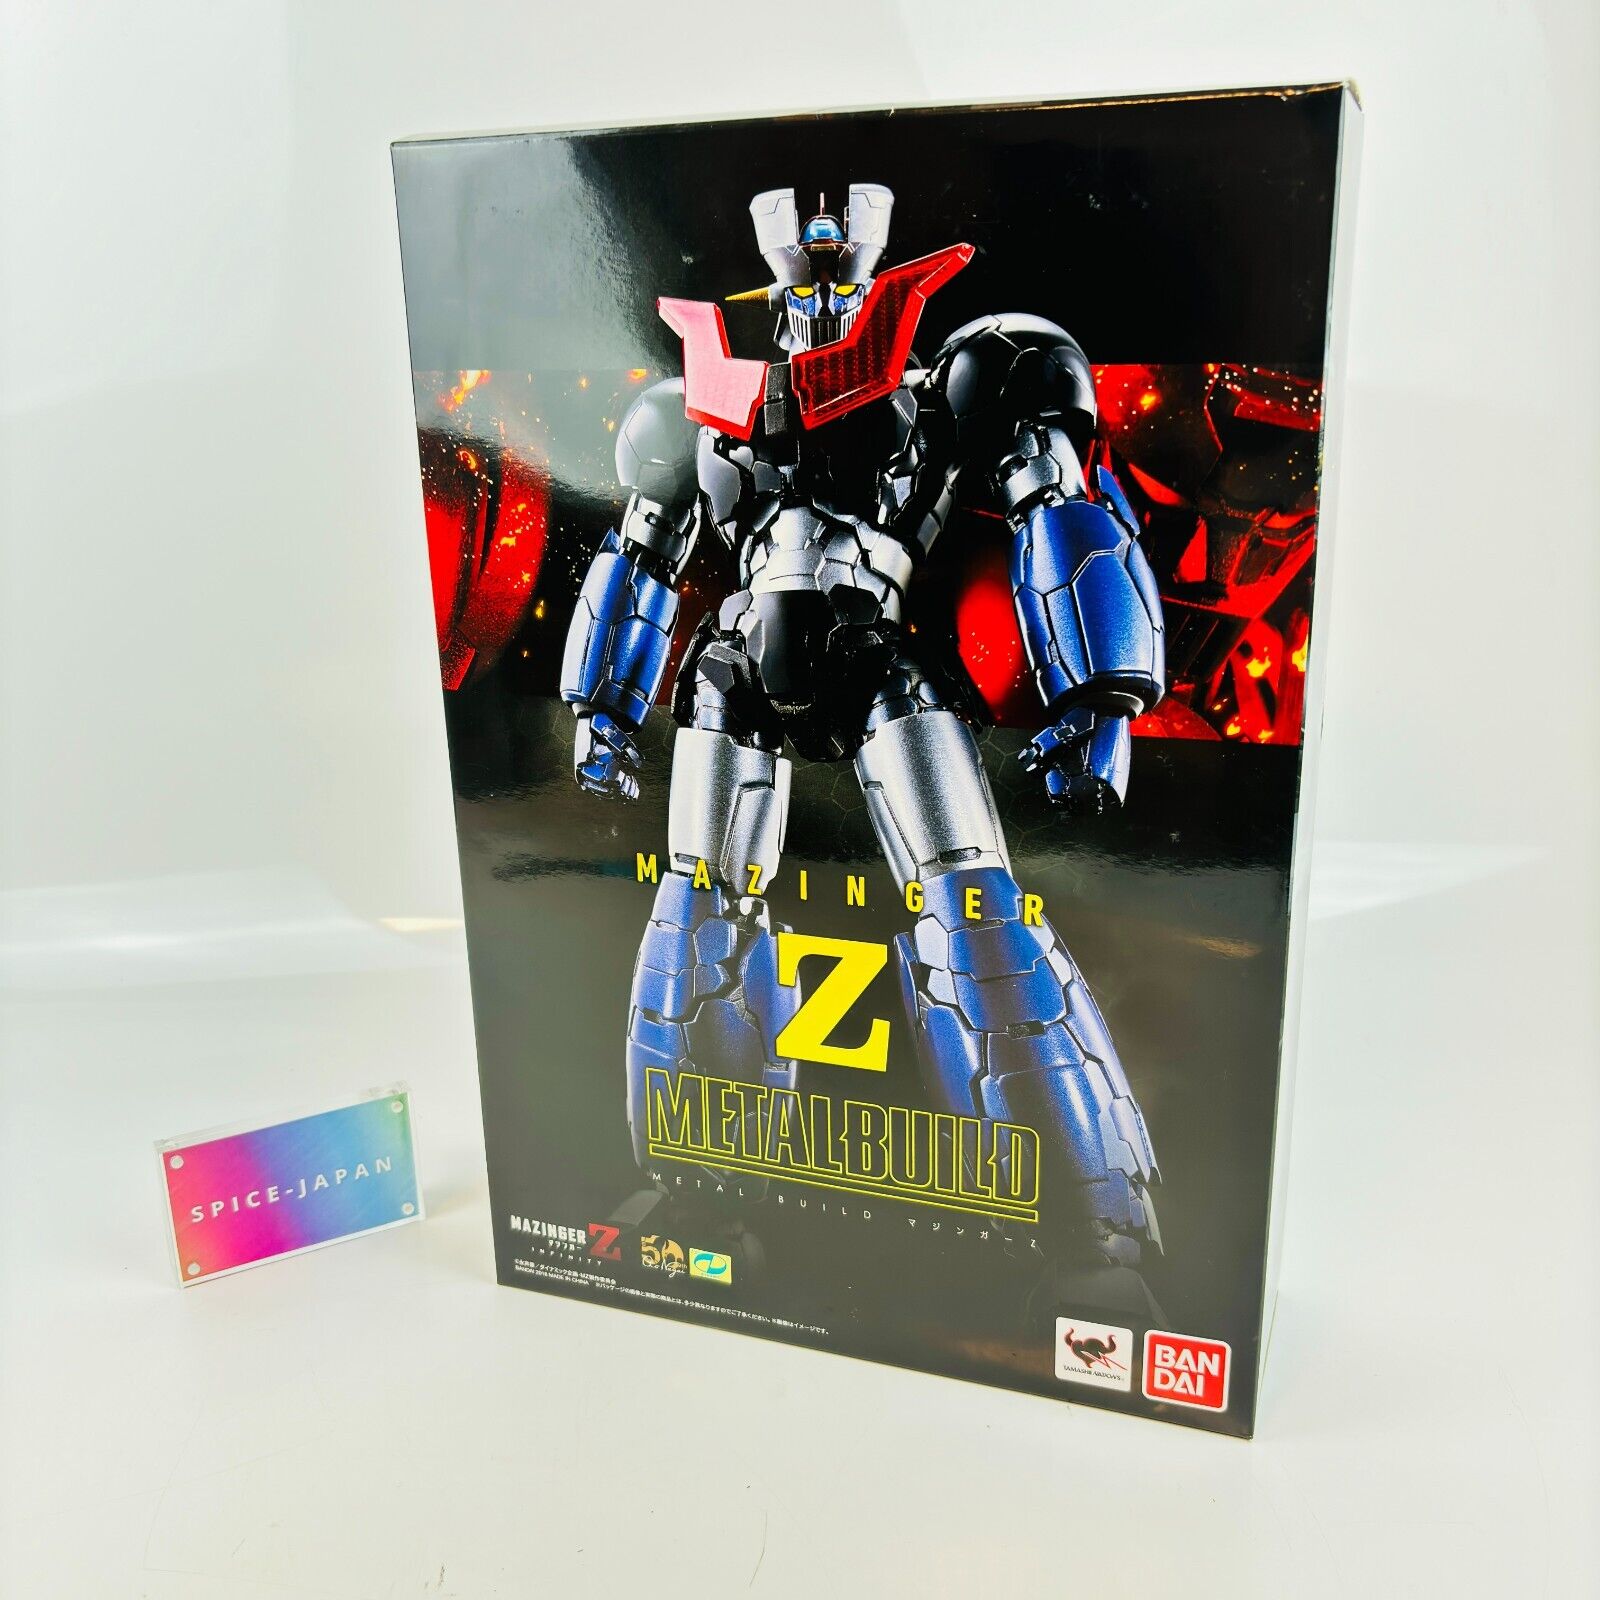 BANDAI Metal Build Mazinger Z Infinity 50th Limited Edition Diecast Figure 180mm